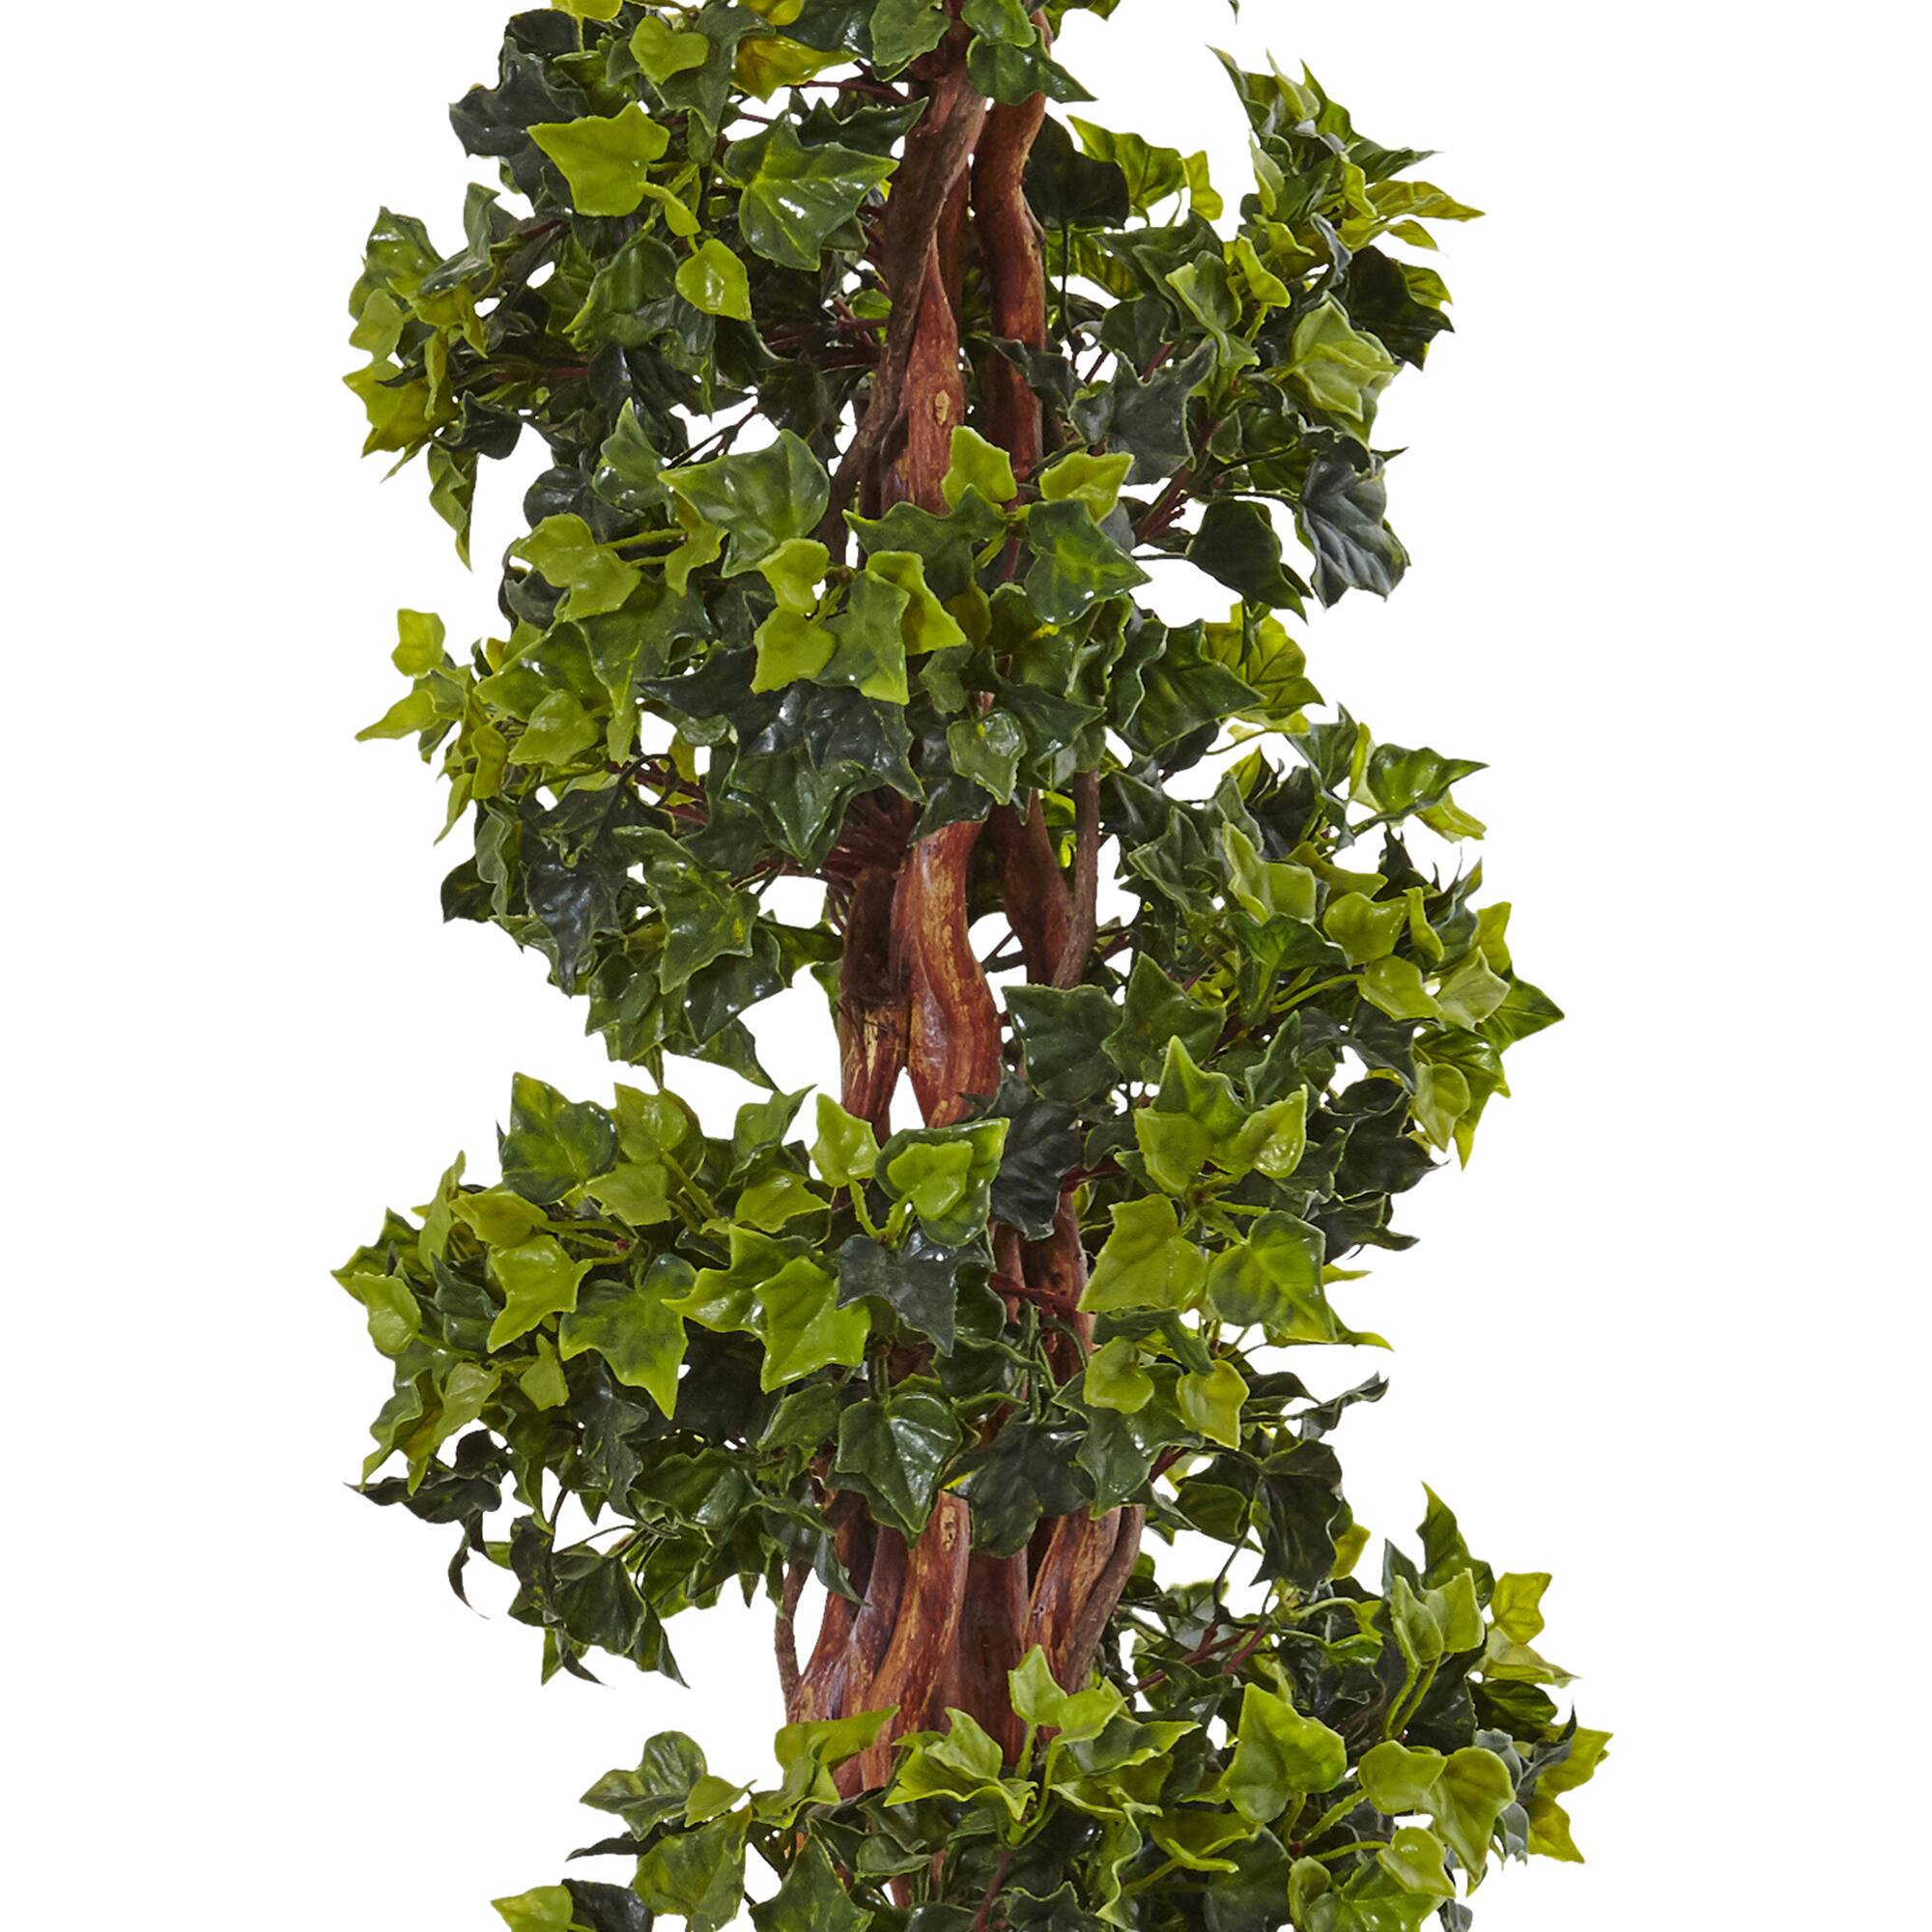 5ft. English Ivy Spiral Topiary Tree in Gray Planter